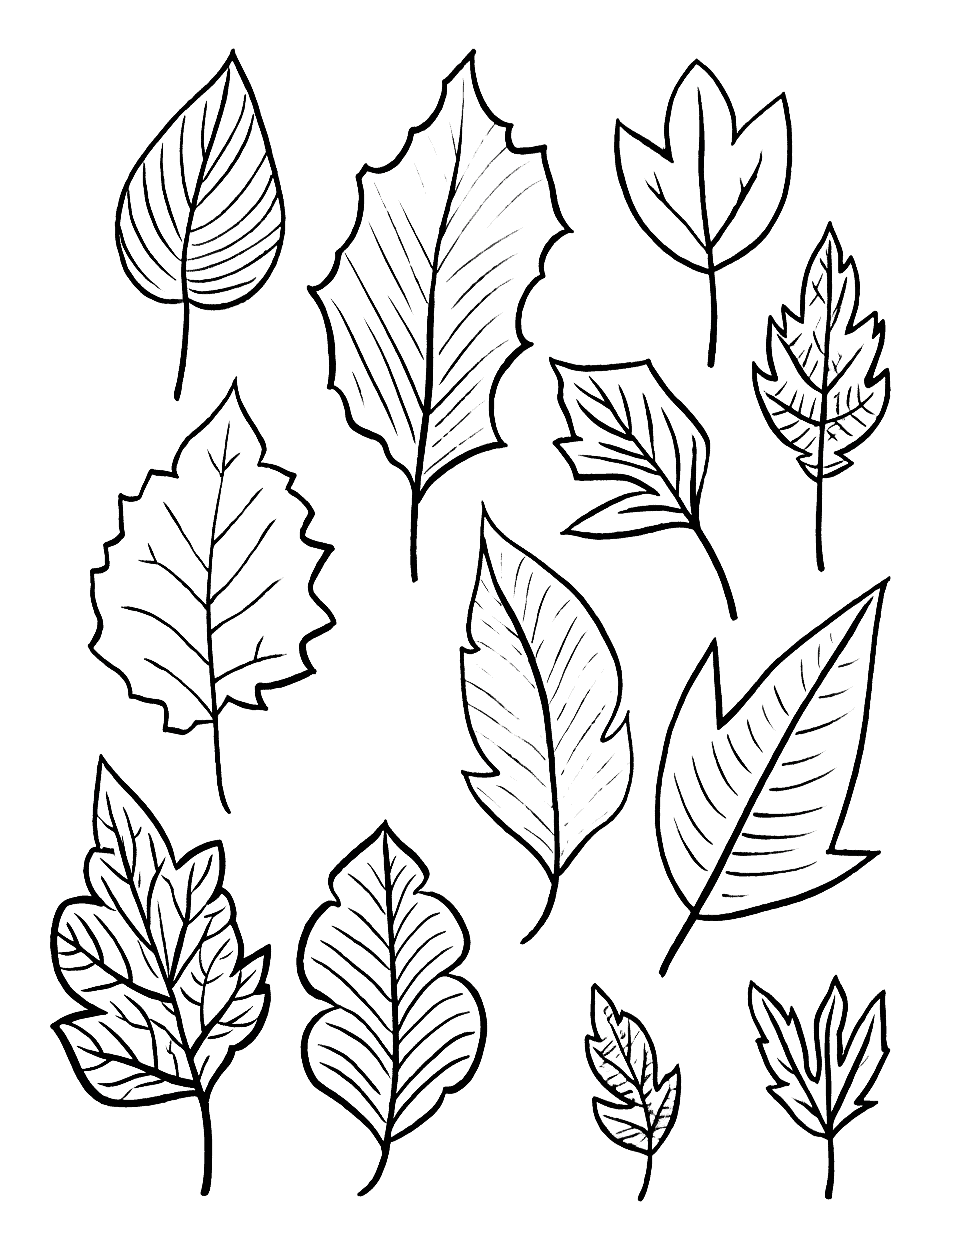 Fall Leaves Scene Thanksgiving Coloring Page - A more complex fall scene with intricate patterns and designs, suitable for 4th graders.